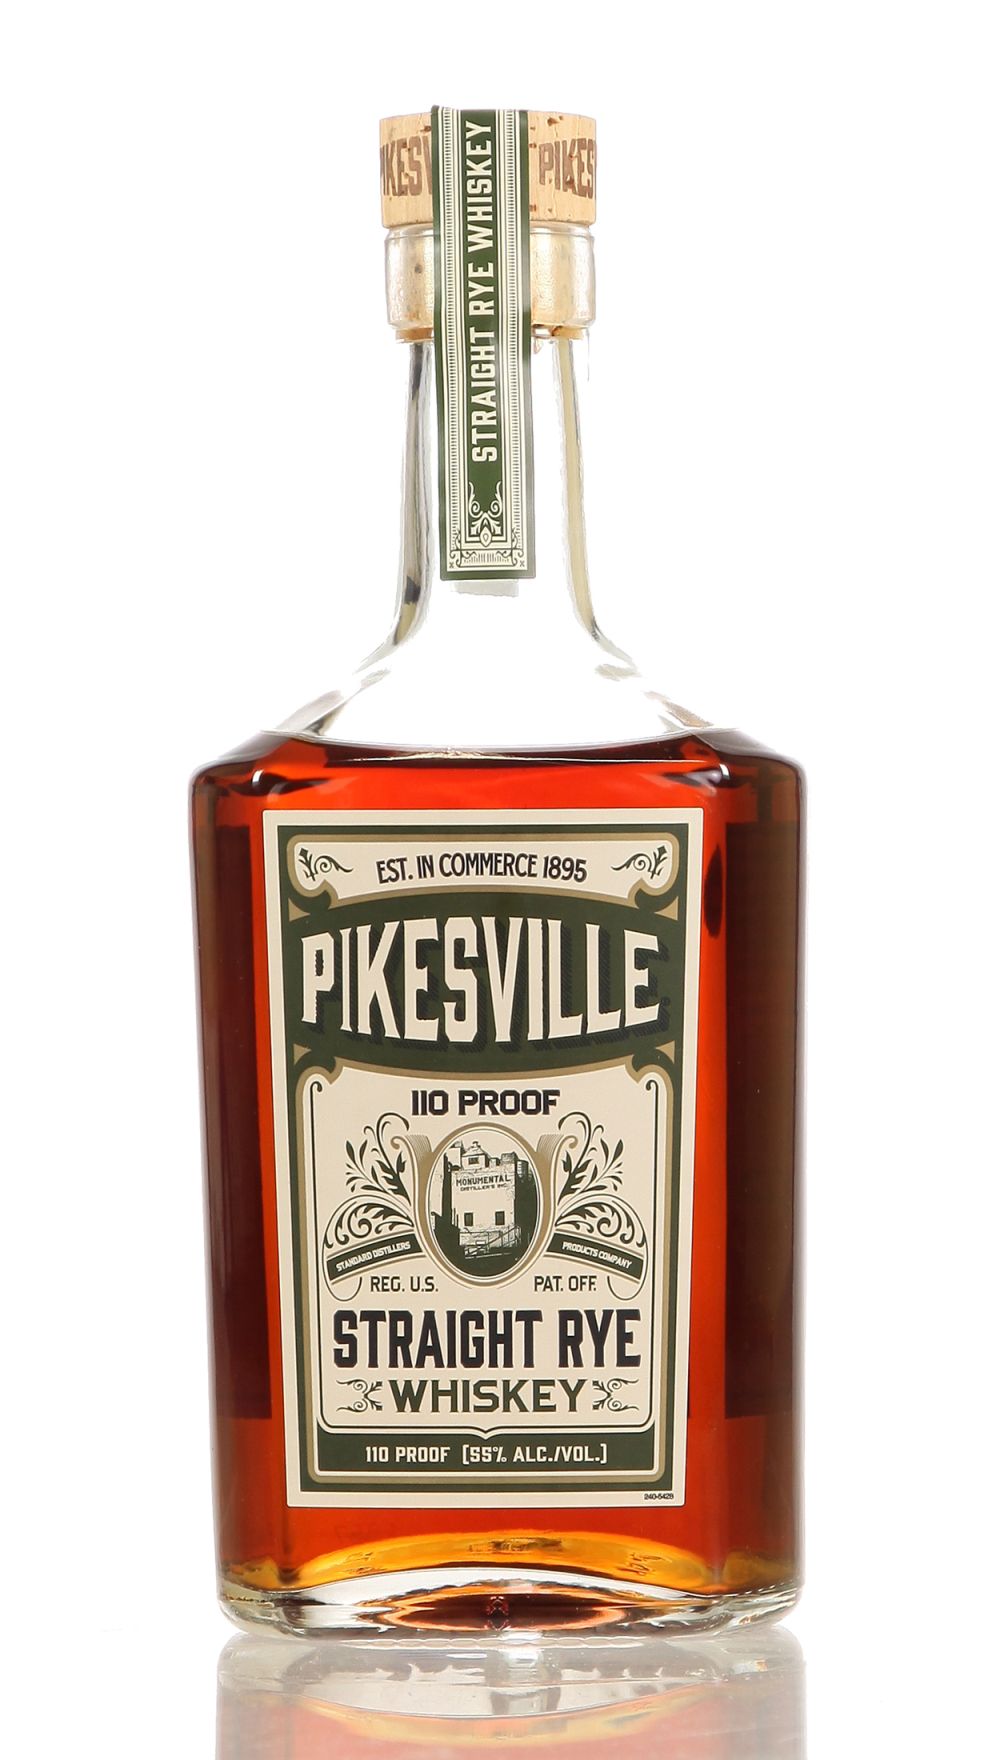 Pikesville Straight Rye 110 Proof | Whisky.de » To the online store